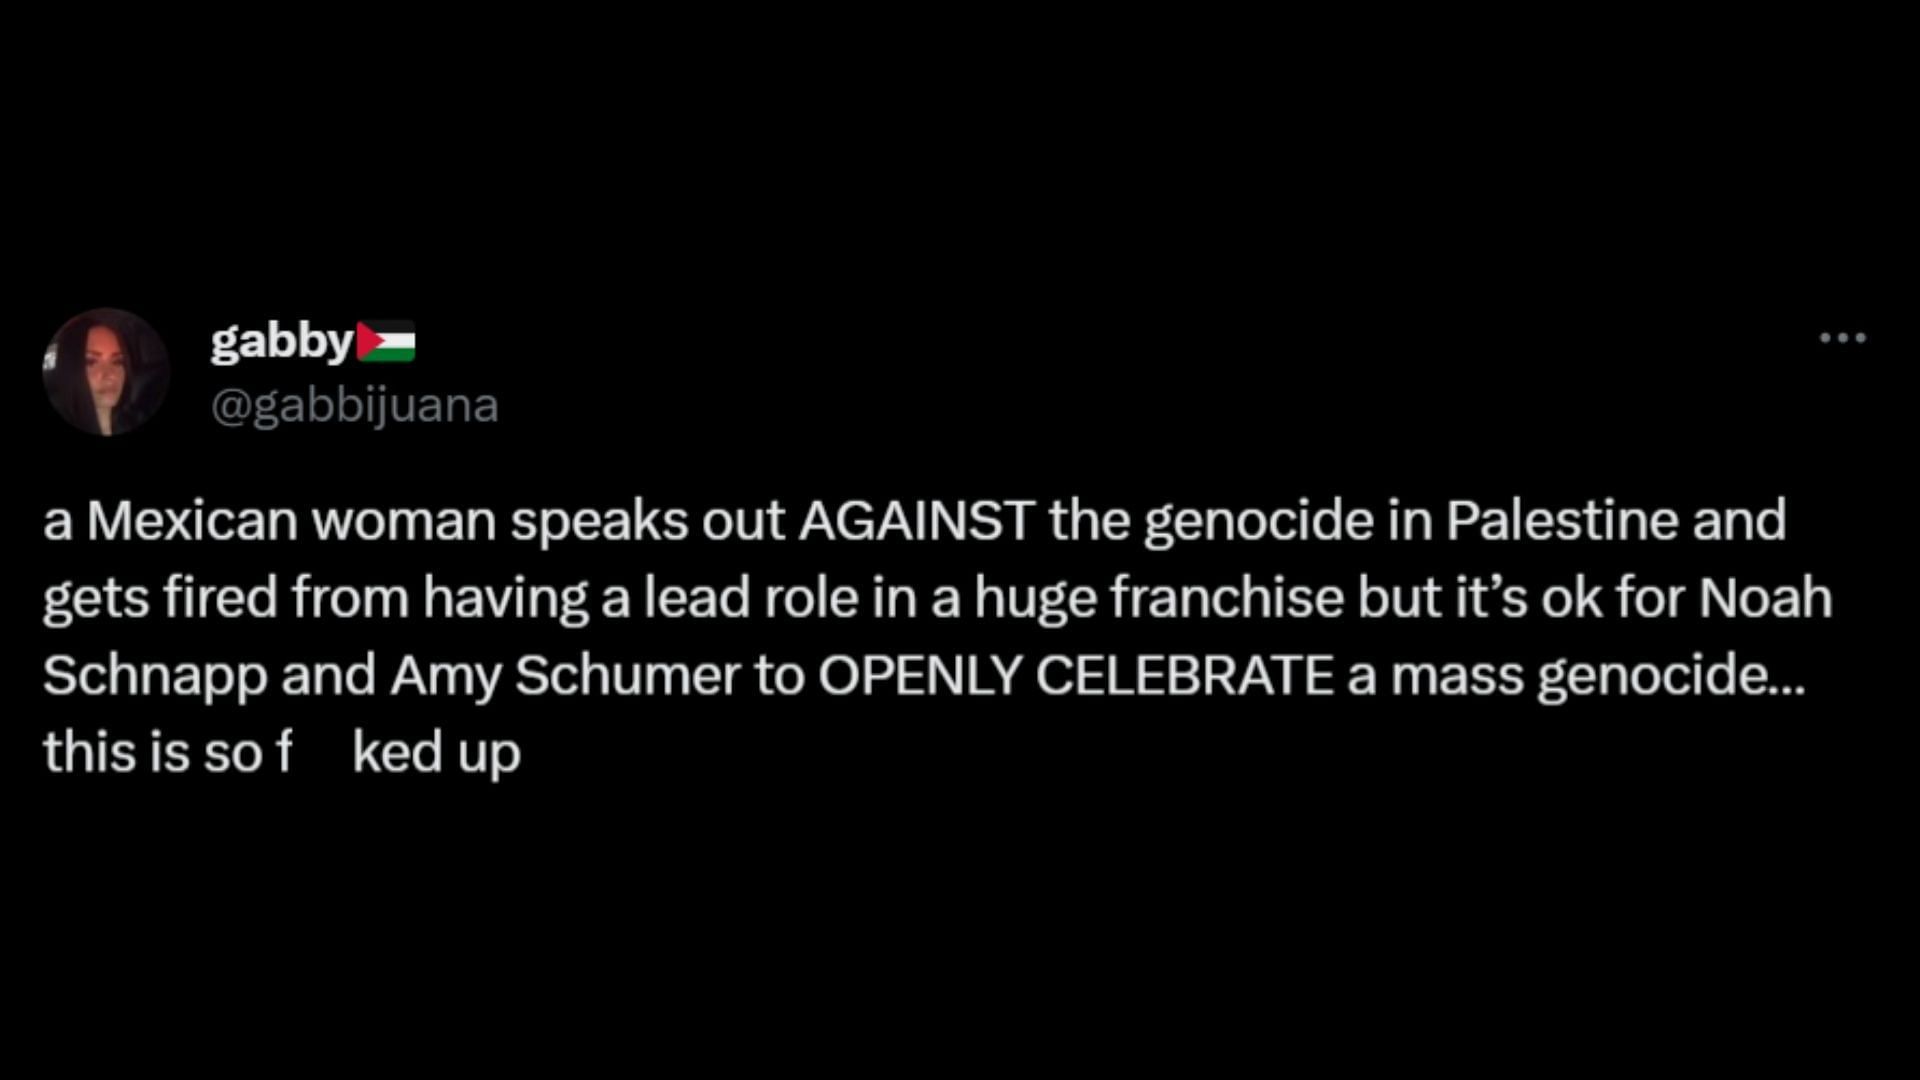 Netizens call out Hollywood for not firing Noah Schnapp or Amy Schumer but dropping Barrera for pro-Palestine posts. (Image via X/@gabbijuana)